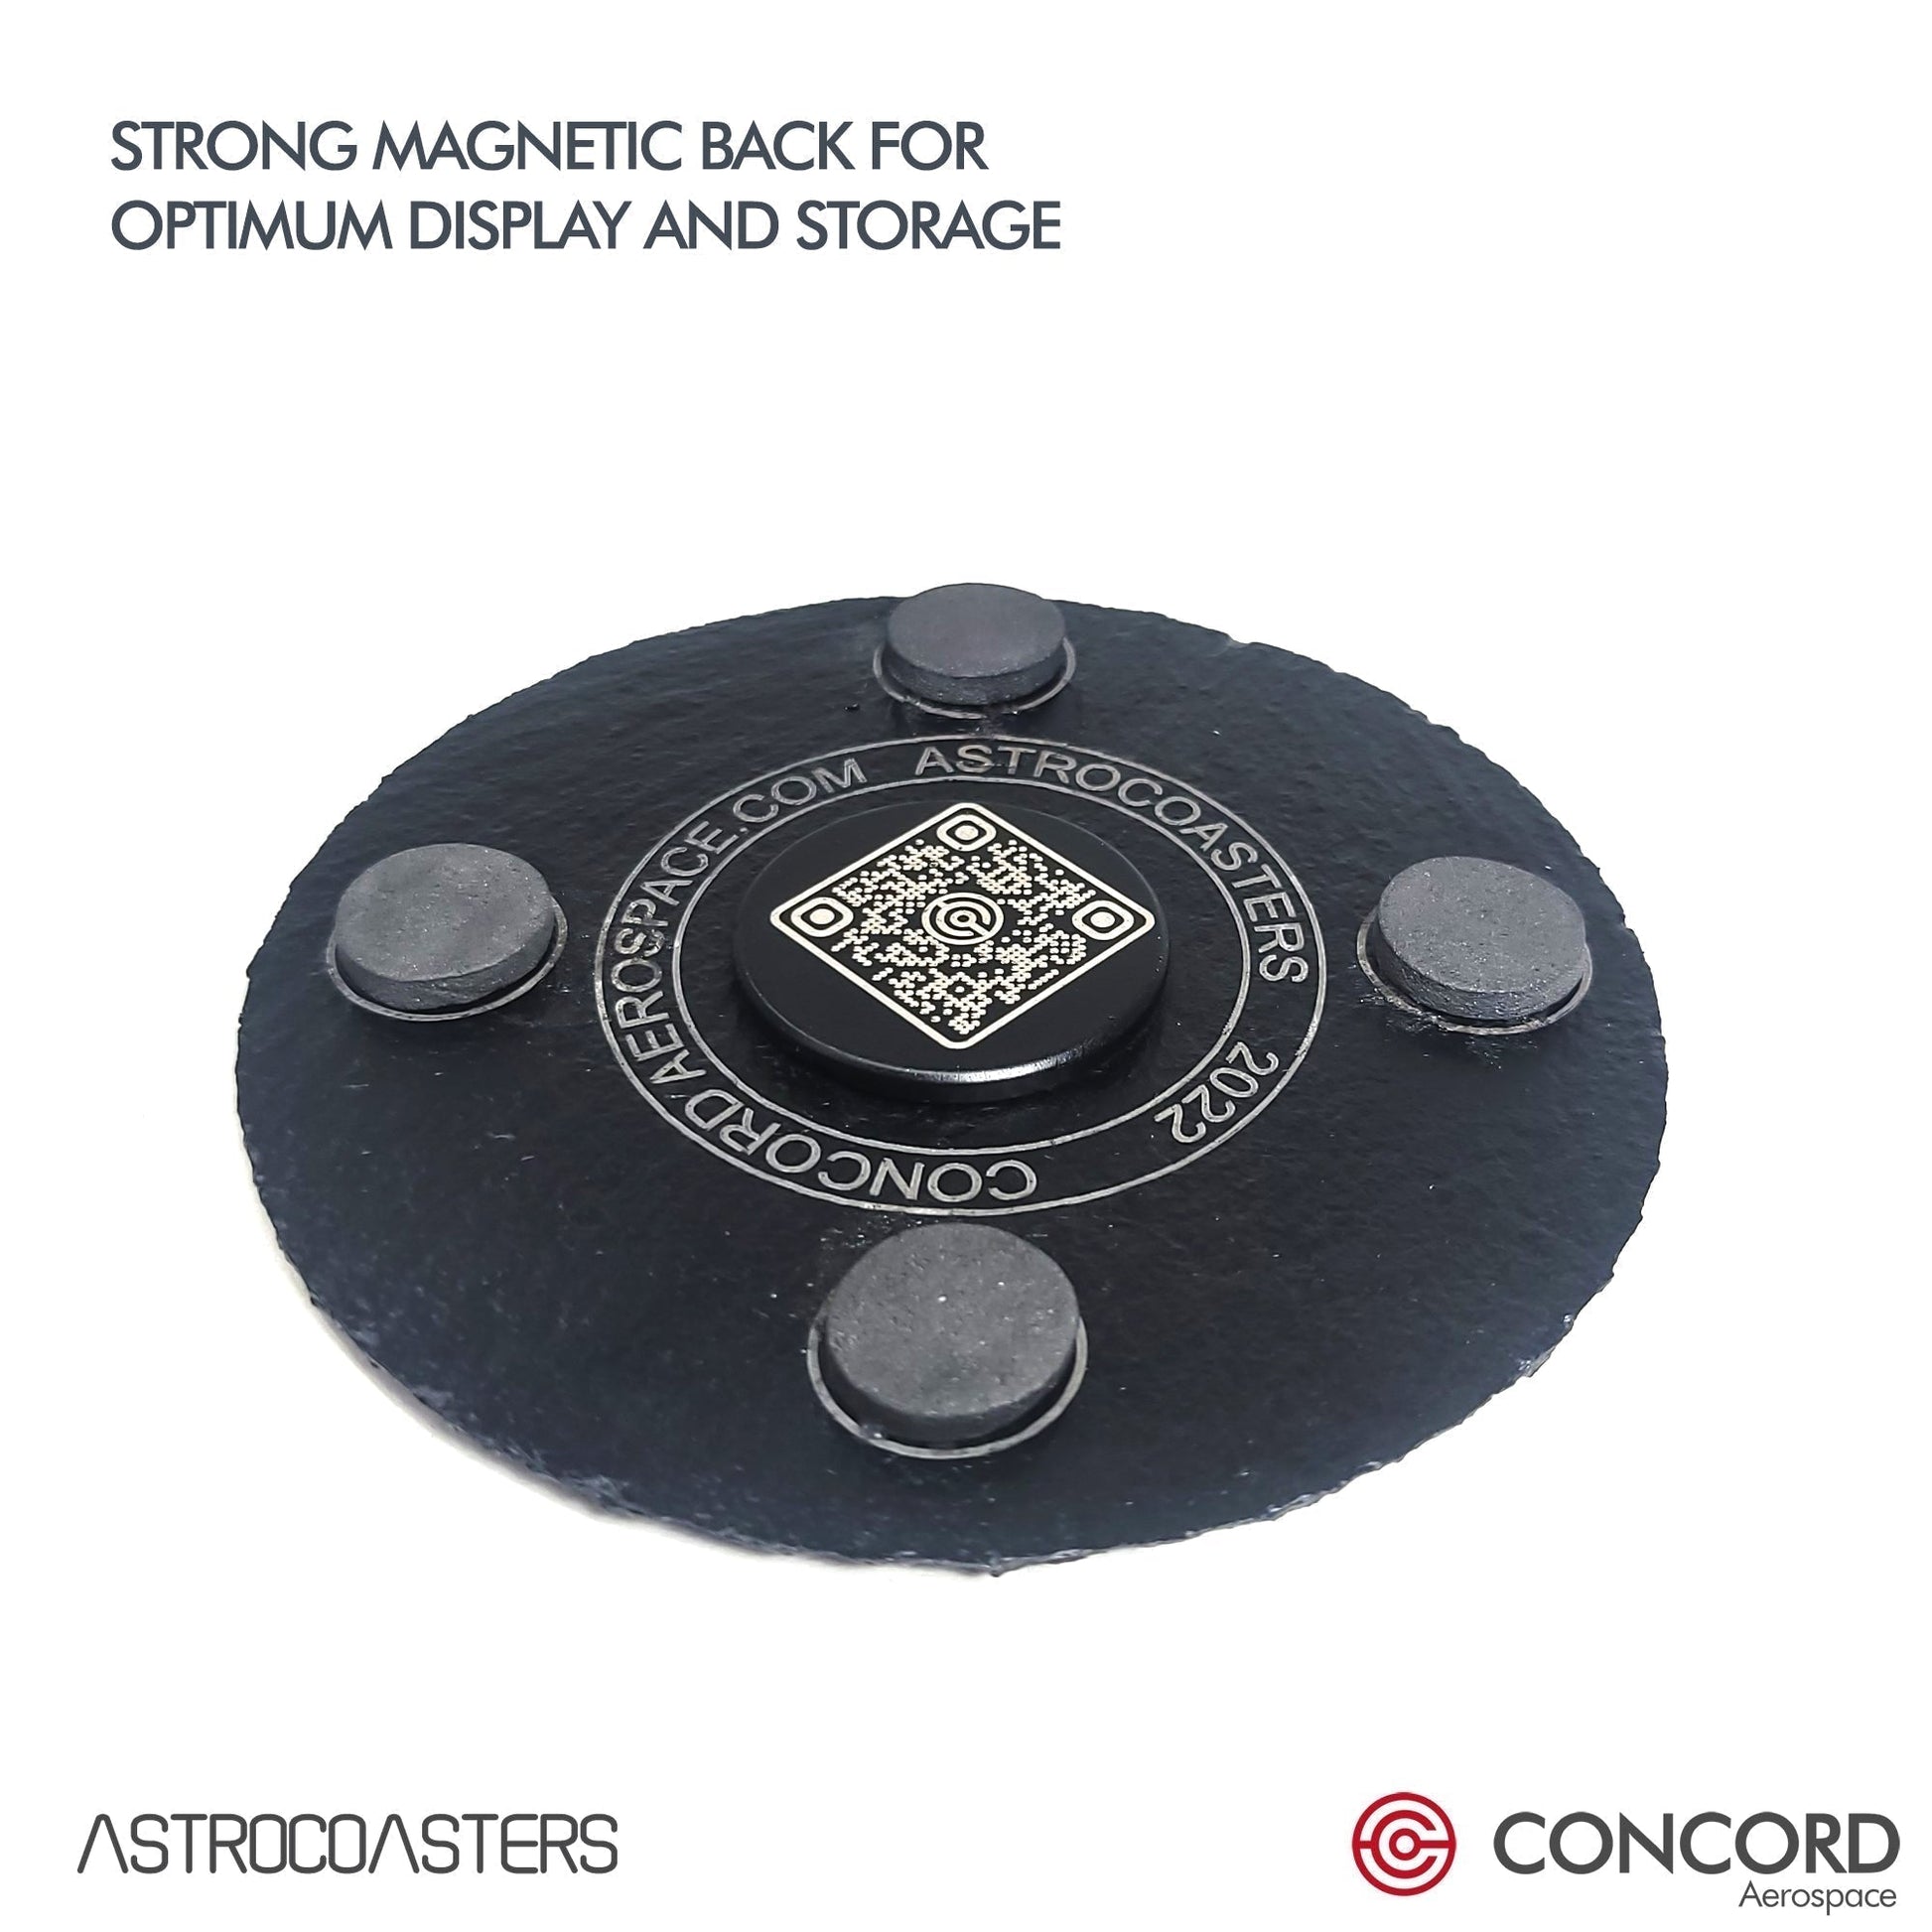 STS - 7 SPACE SHUTTLE - SLATE COASTER - Concord Aerospace Concord Aerospace Concord Aerospace Coasters